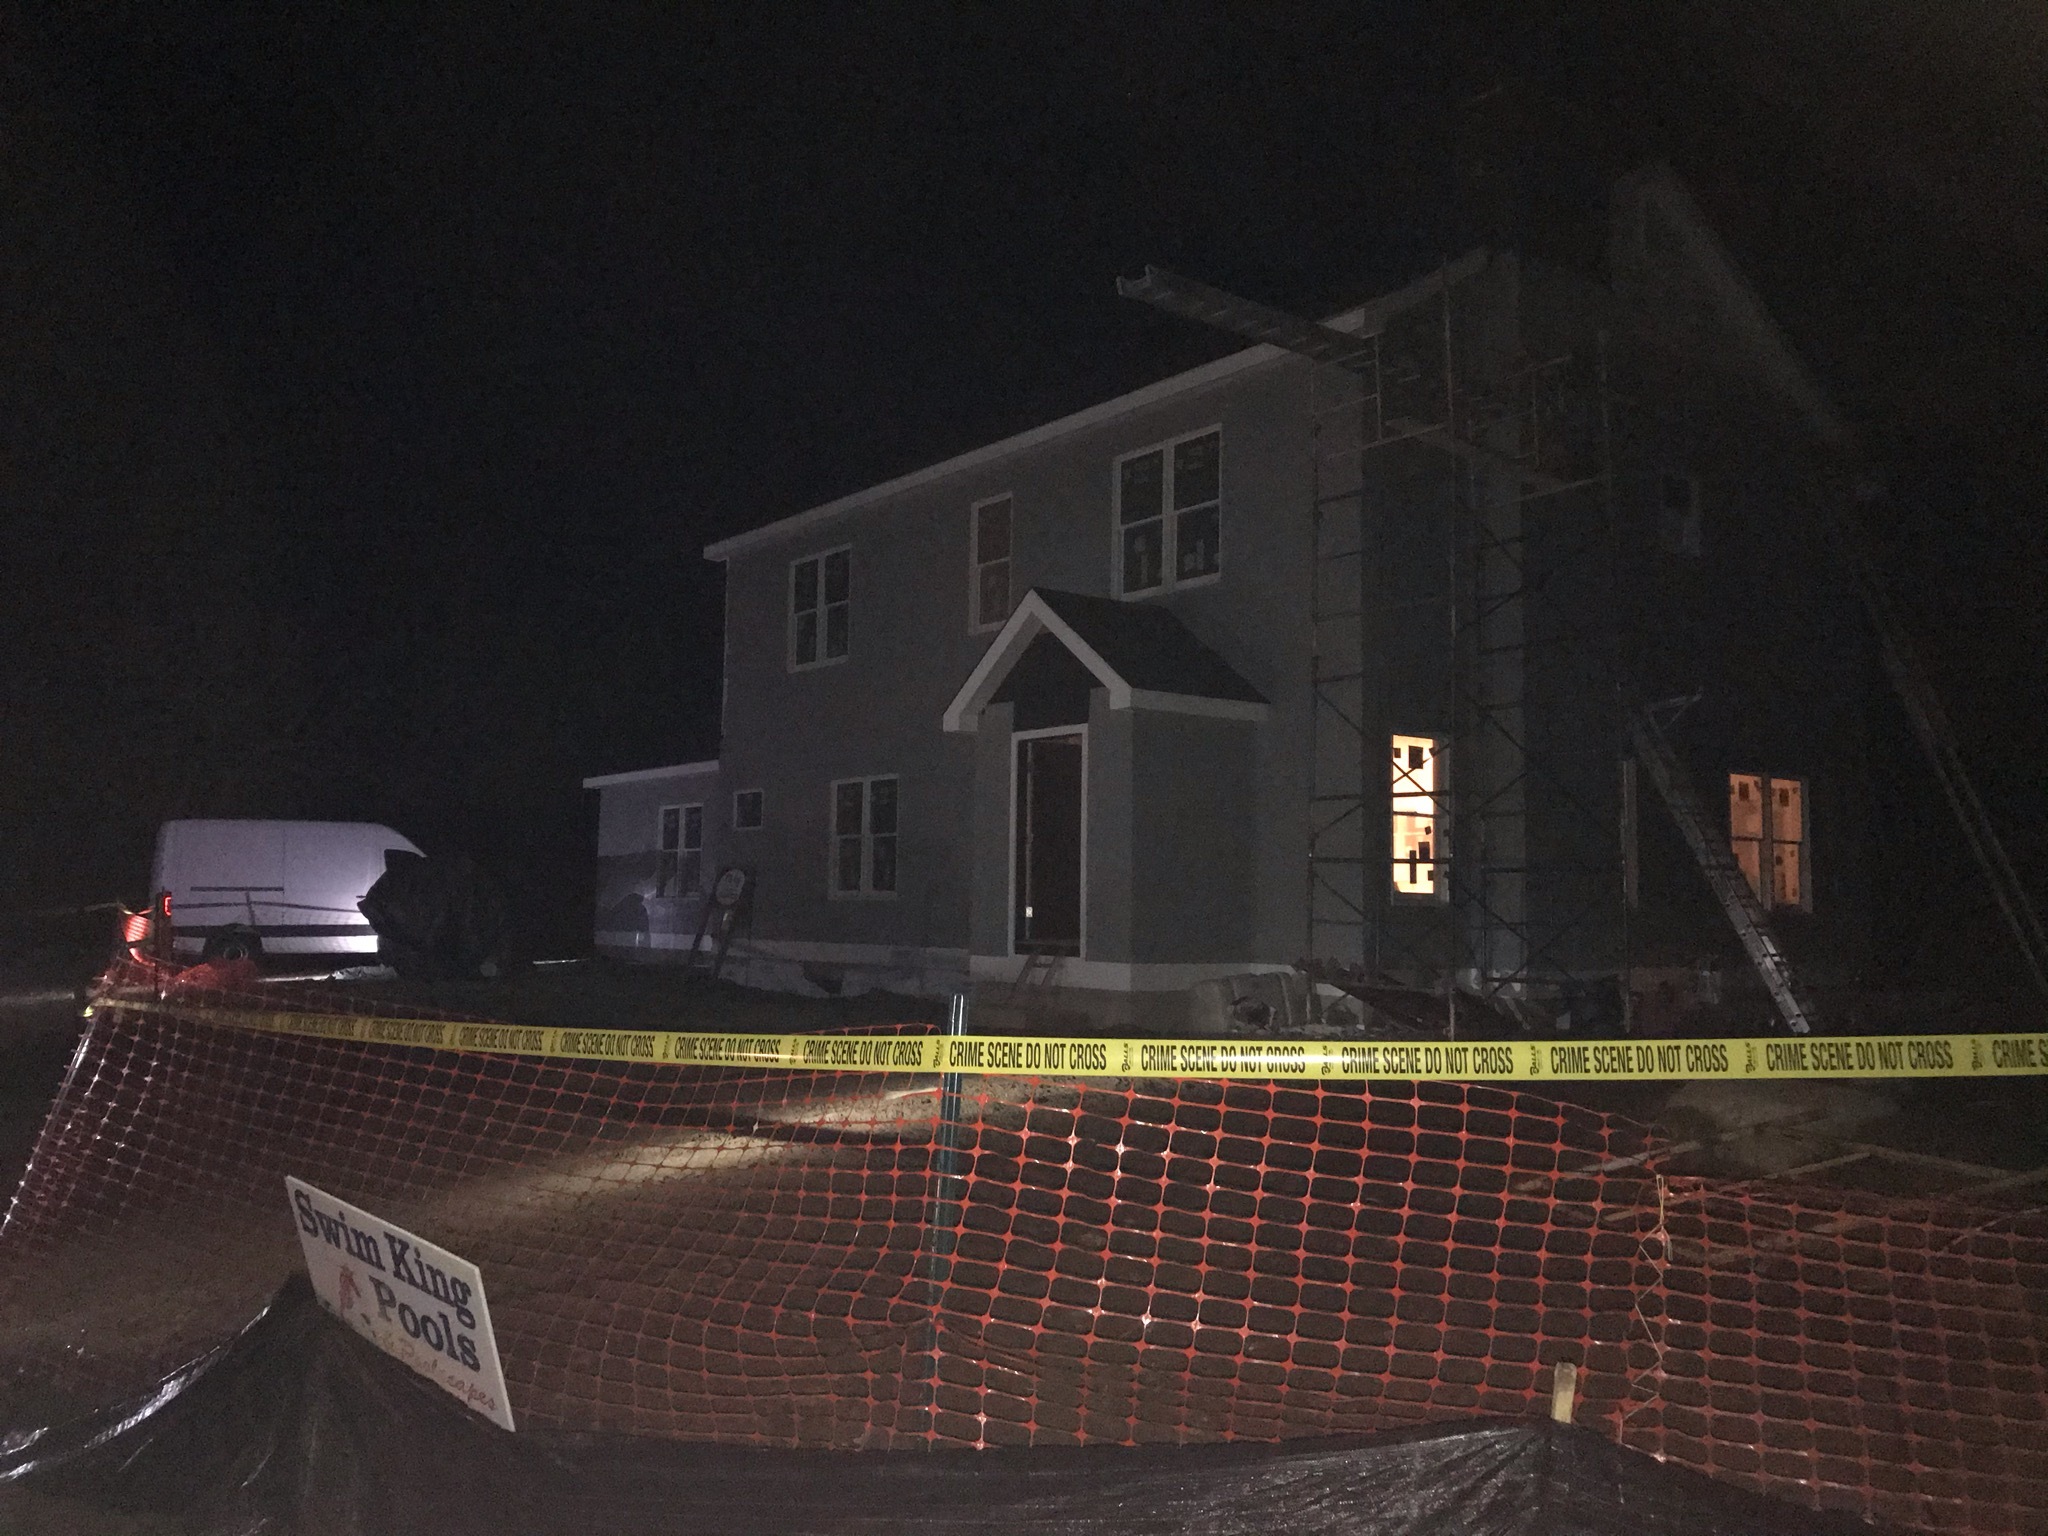 East Hampton Town Police responded to a construction accident at 57 Glenmore Avenue in Montauk on Friday night.